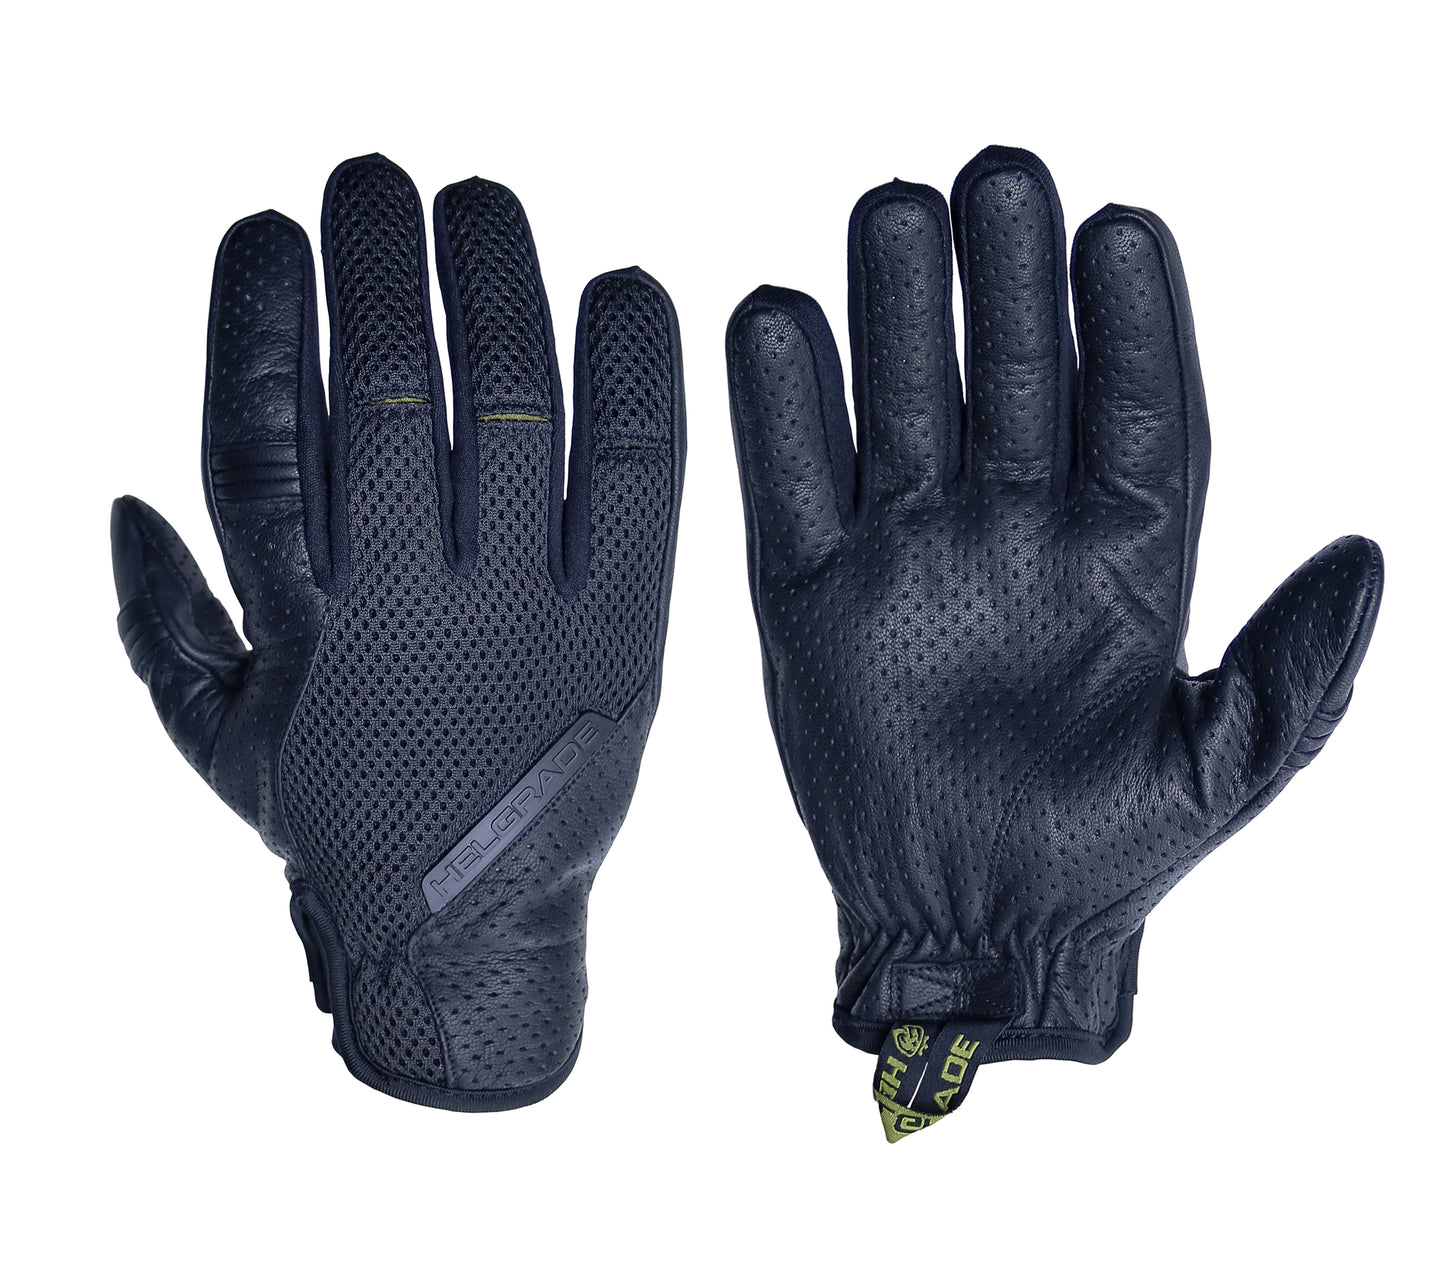 Beckford Leather and Mesh Glove